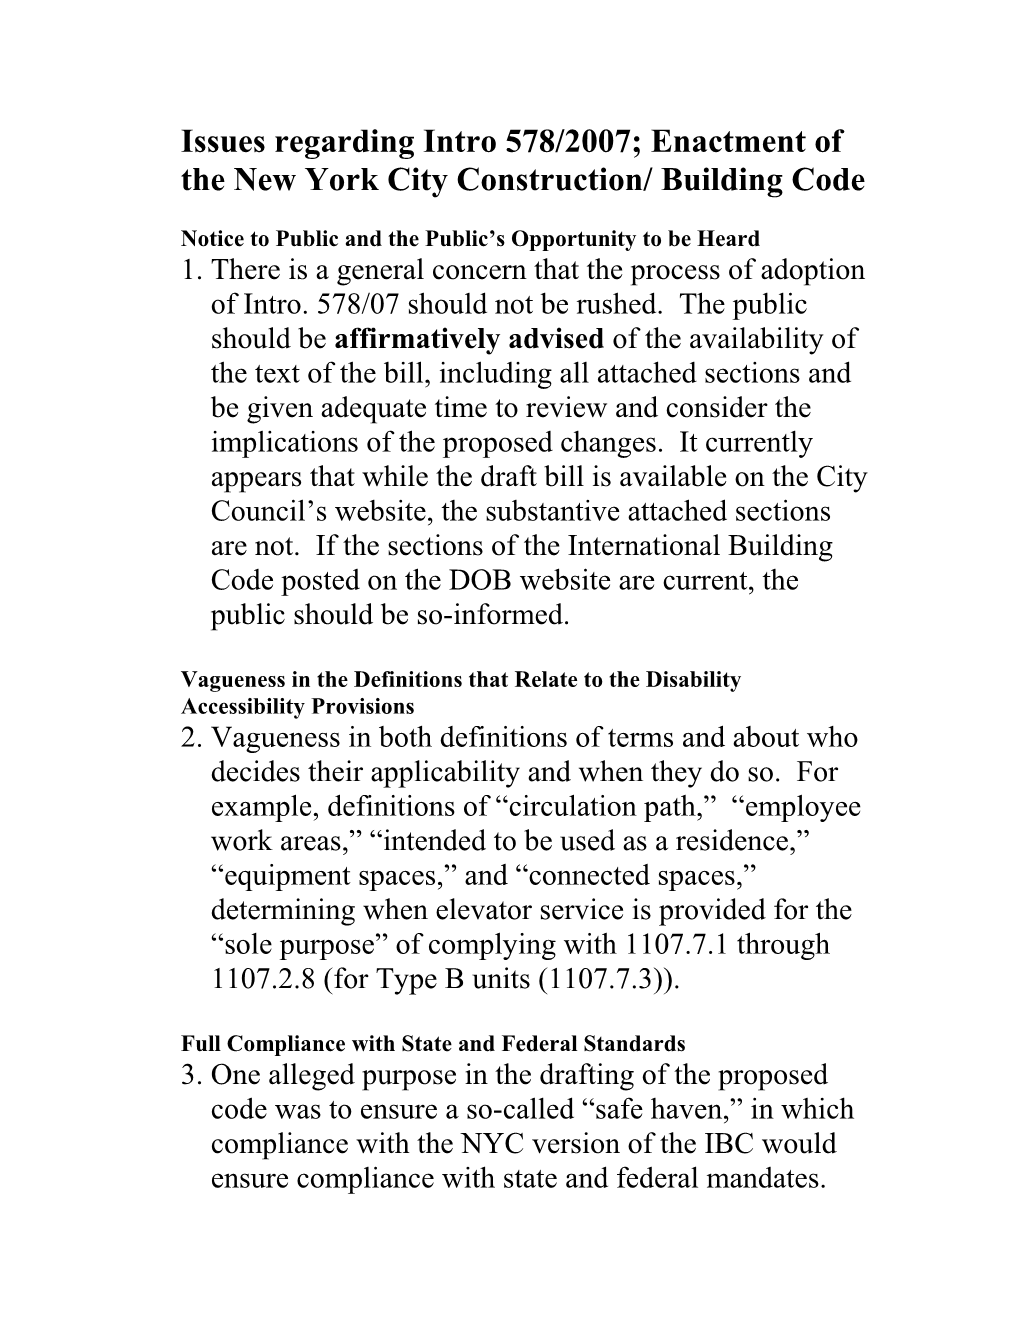 Issues Regarding Intro 578/2007; Enactment of the New York City Construction/ Building Code